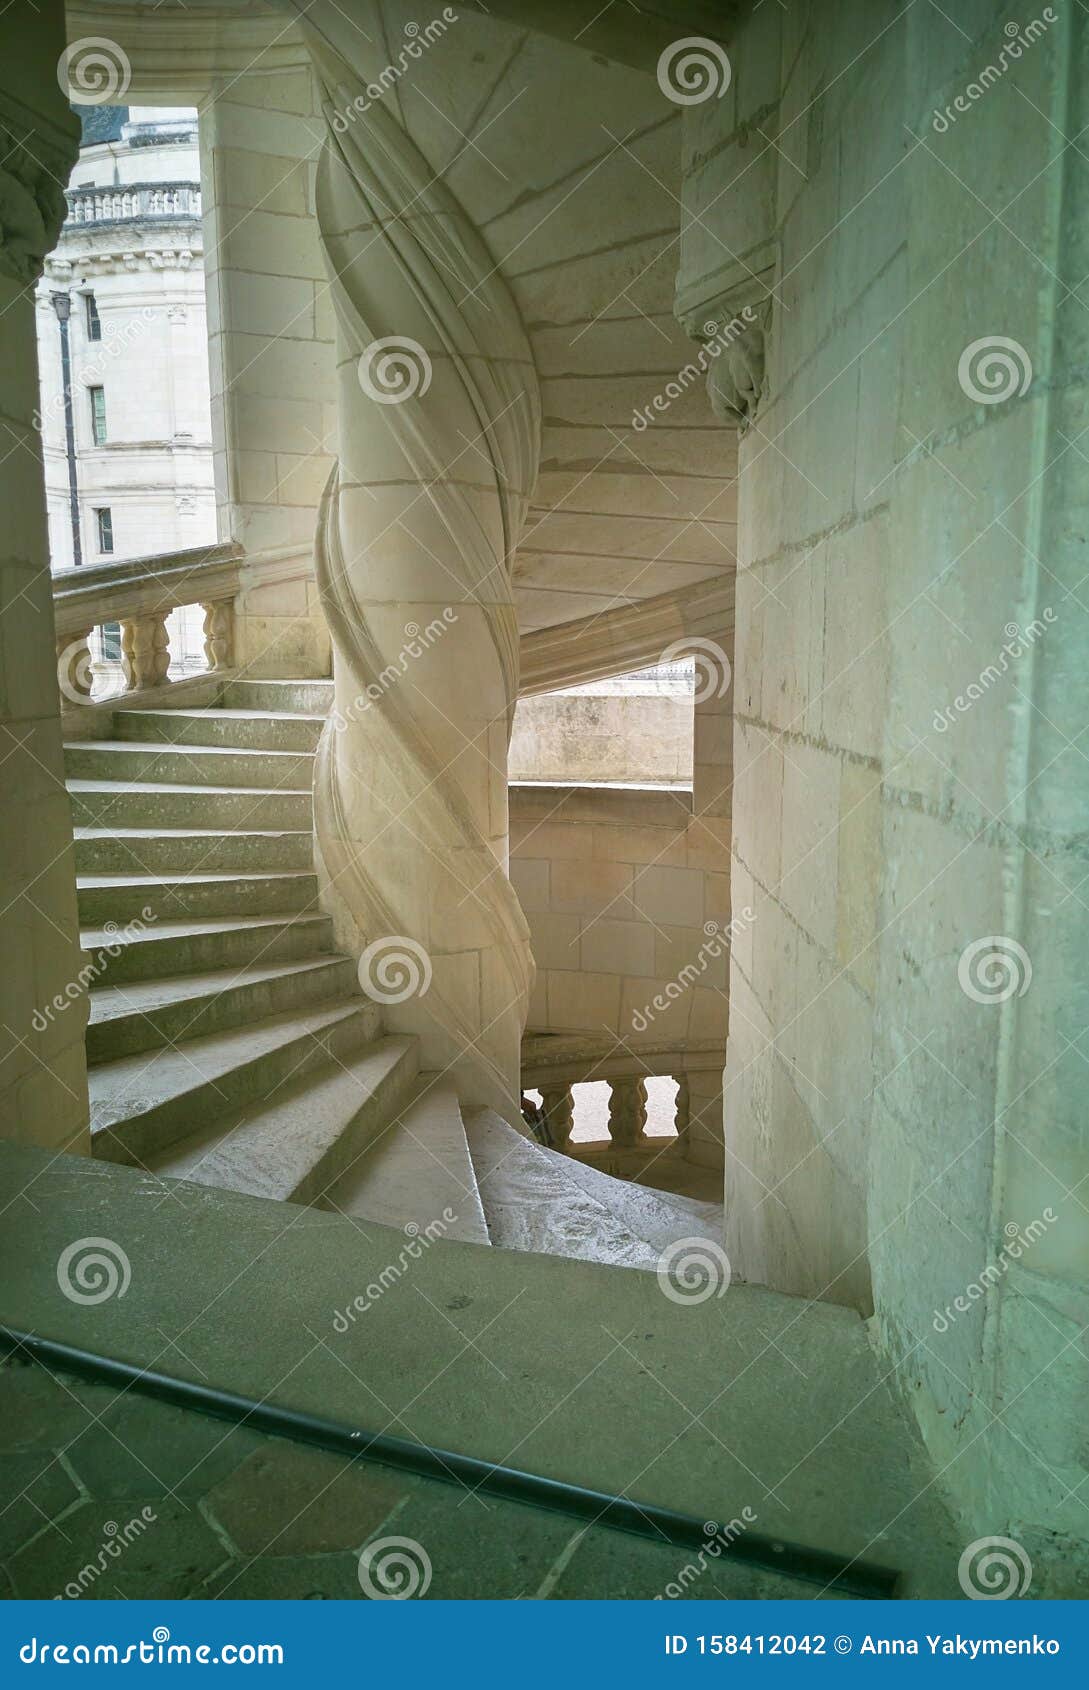 View from the Terrace of the Medieval Spiral Staircase of the Castle